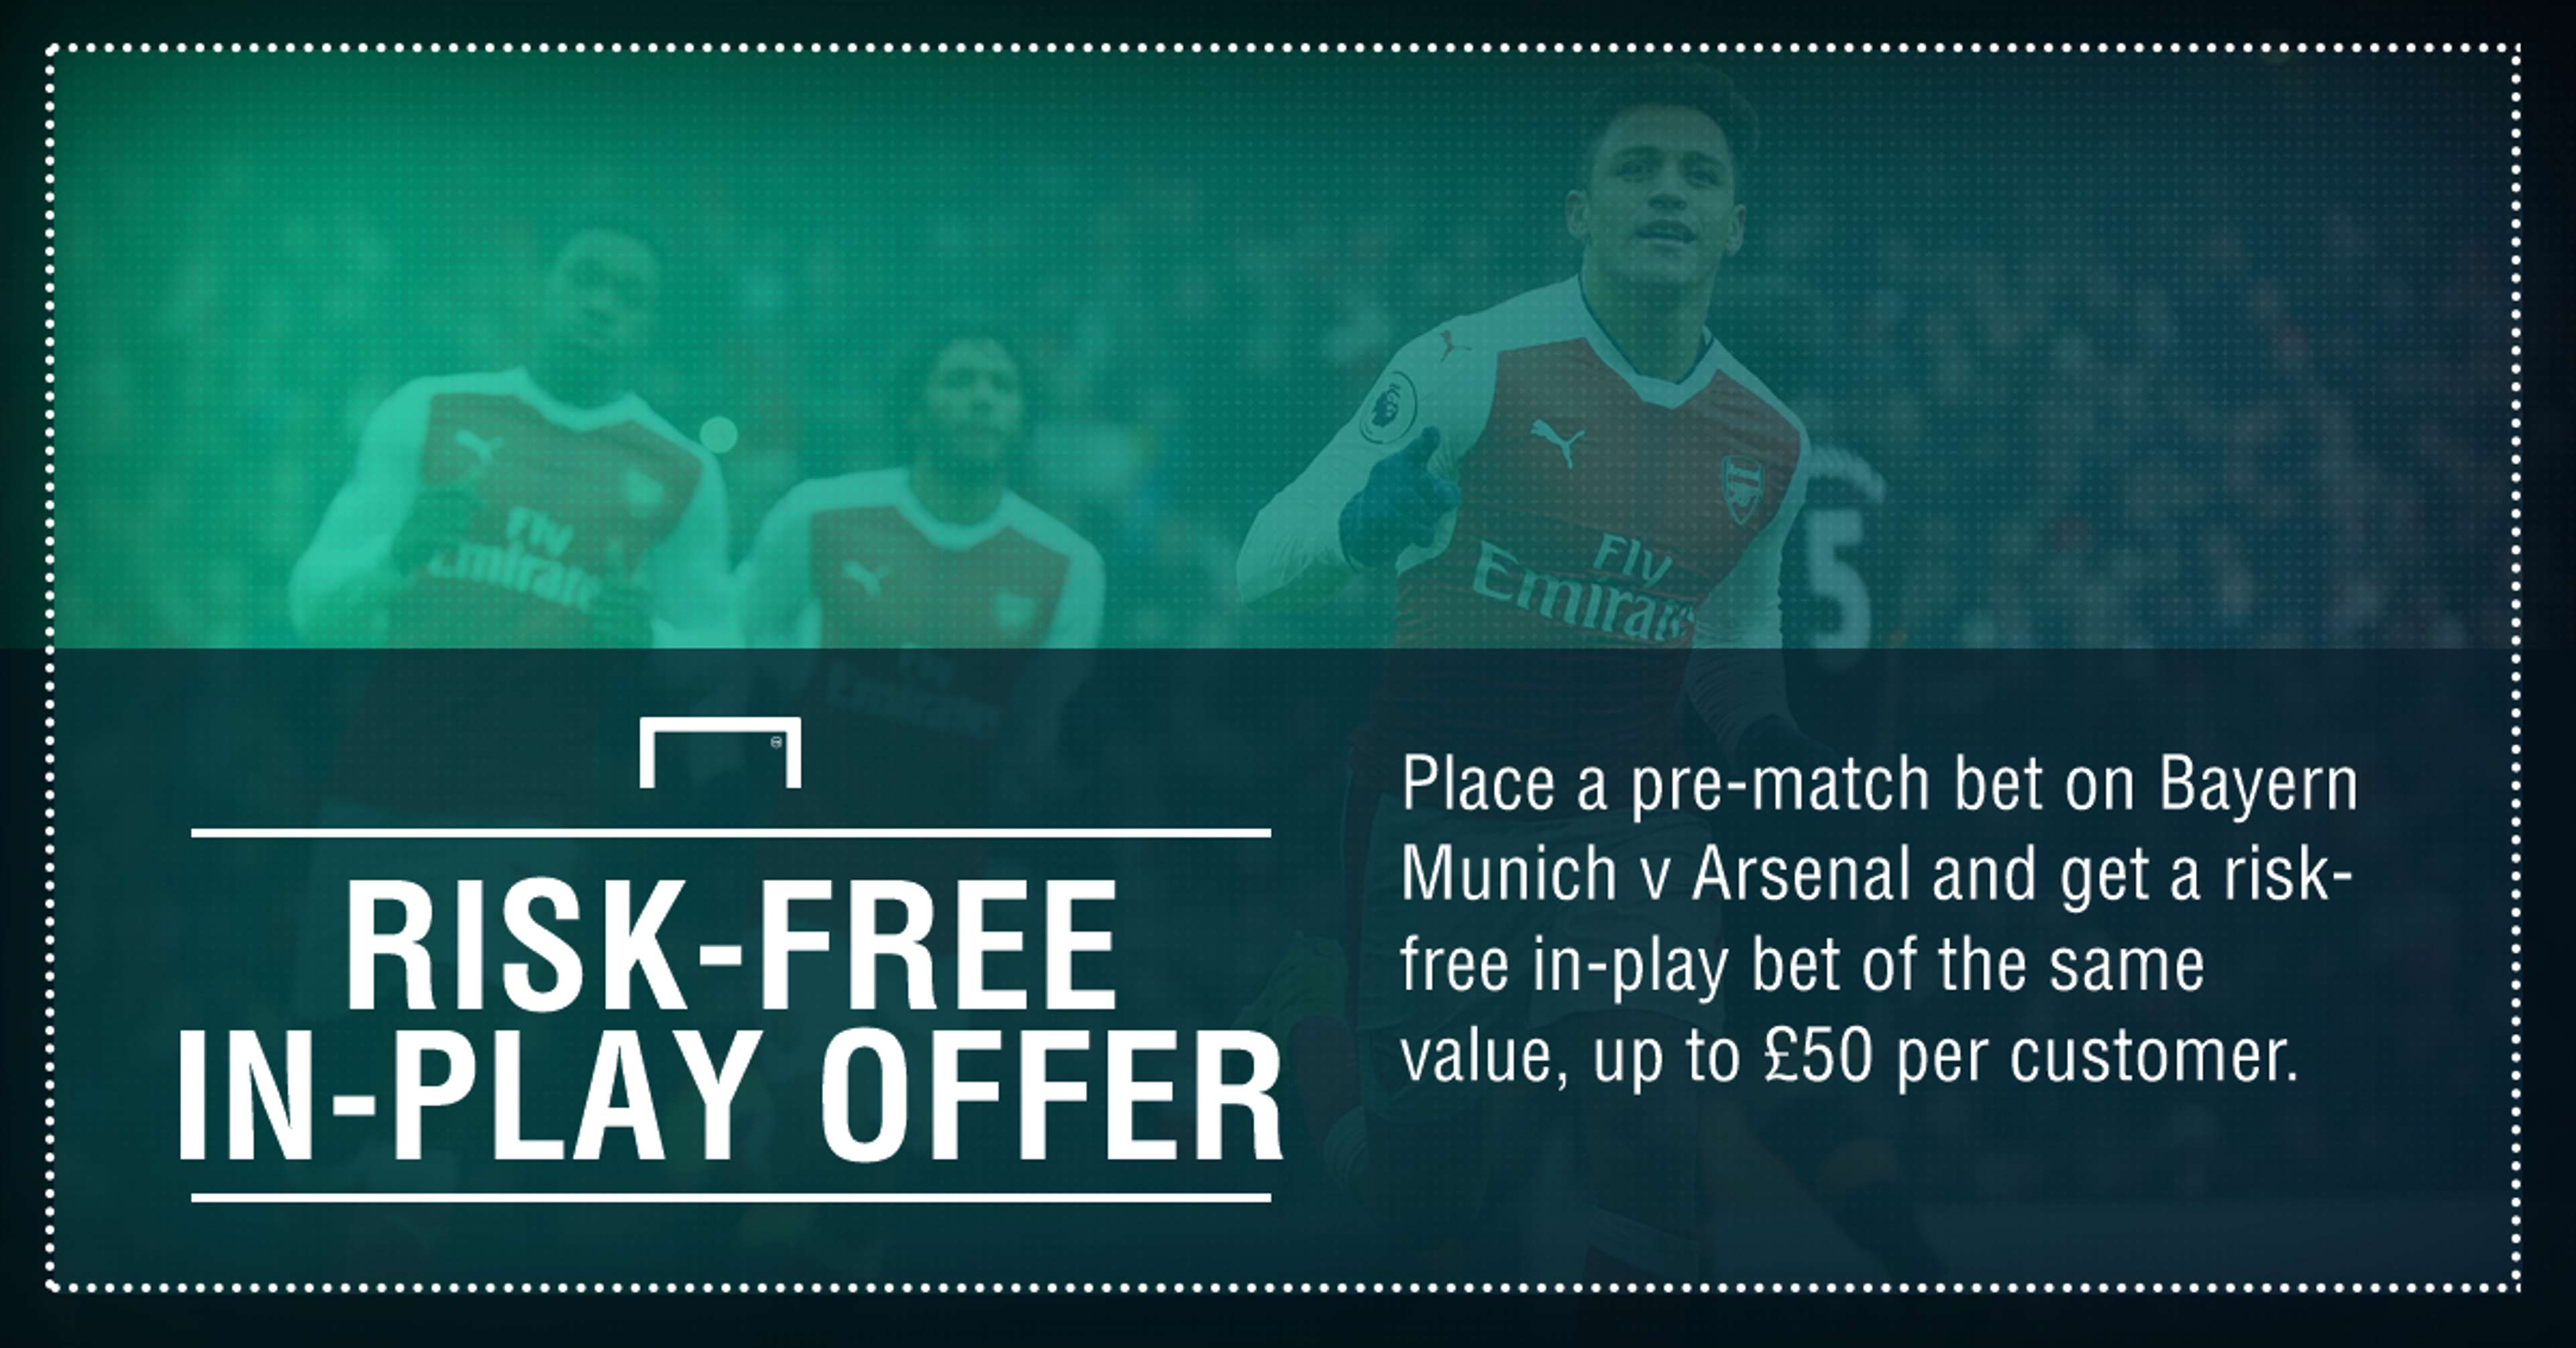 GFX FACT BET365 RISK-FREE IN-PLAY